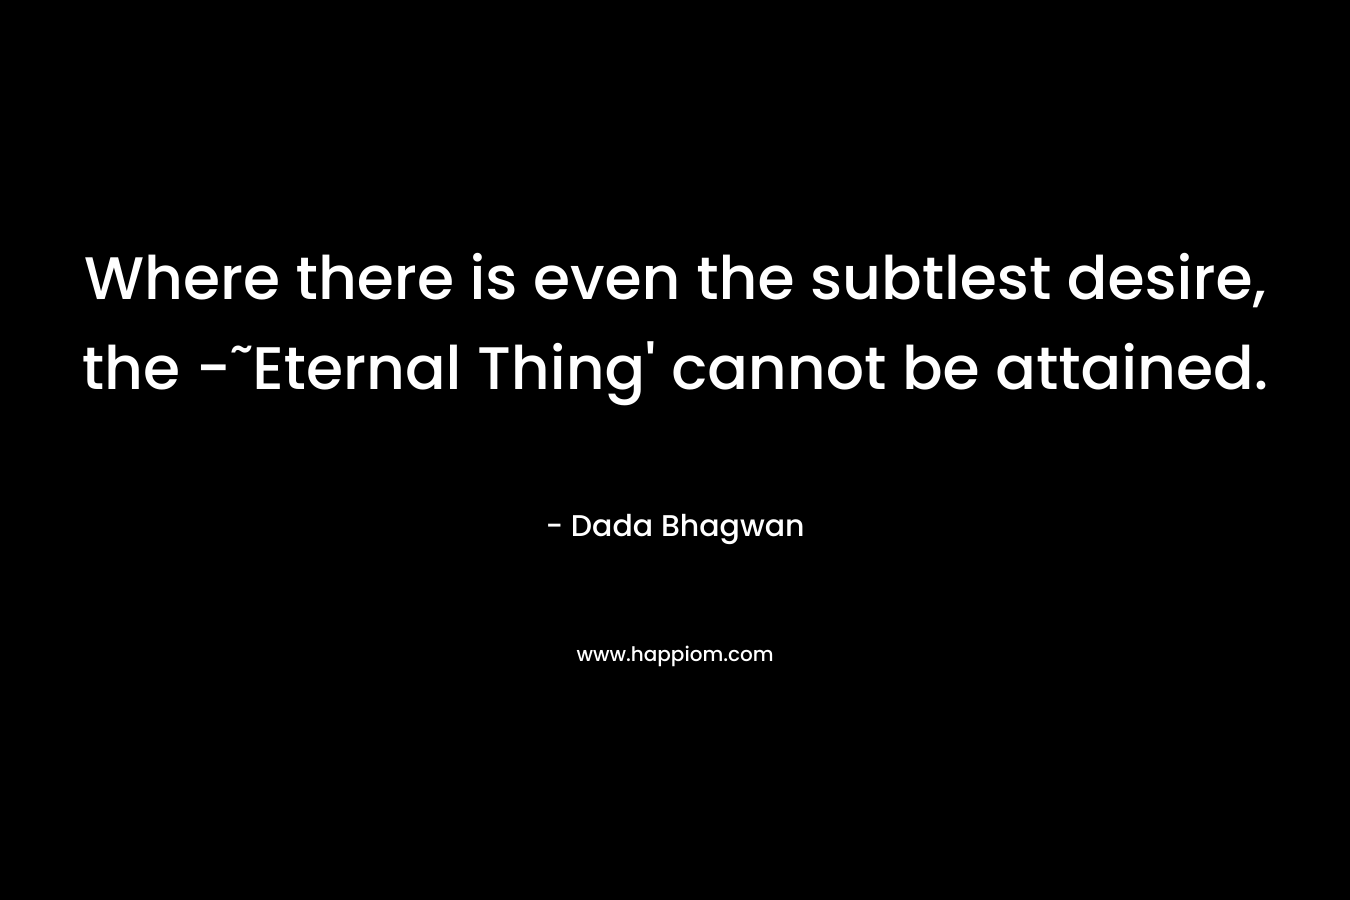 Where there is even the subtlest desire, the -˜Eternal Thing' cannot be attained.